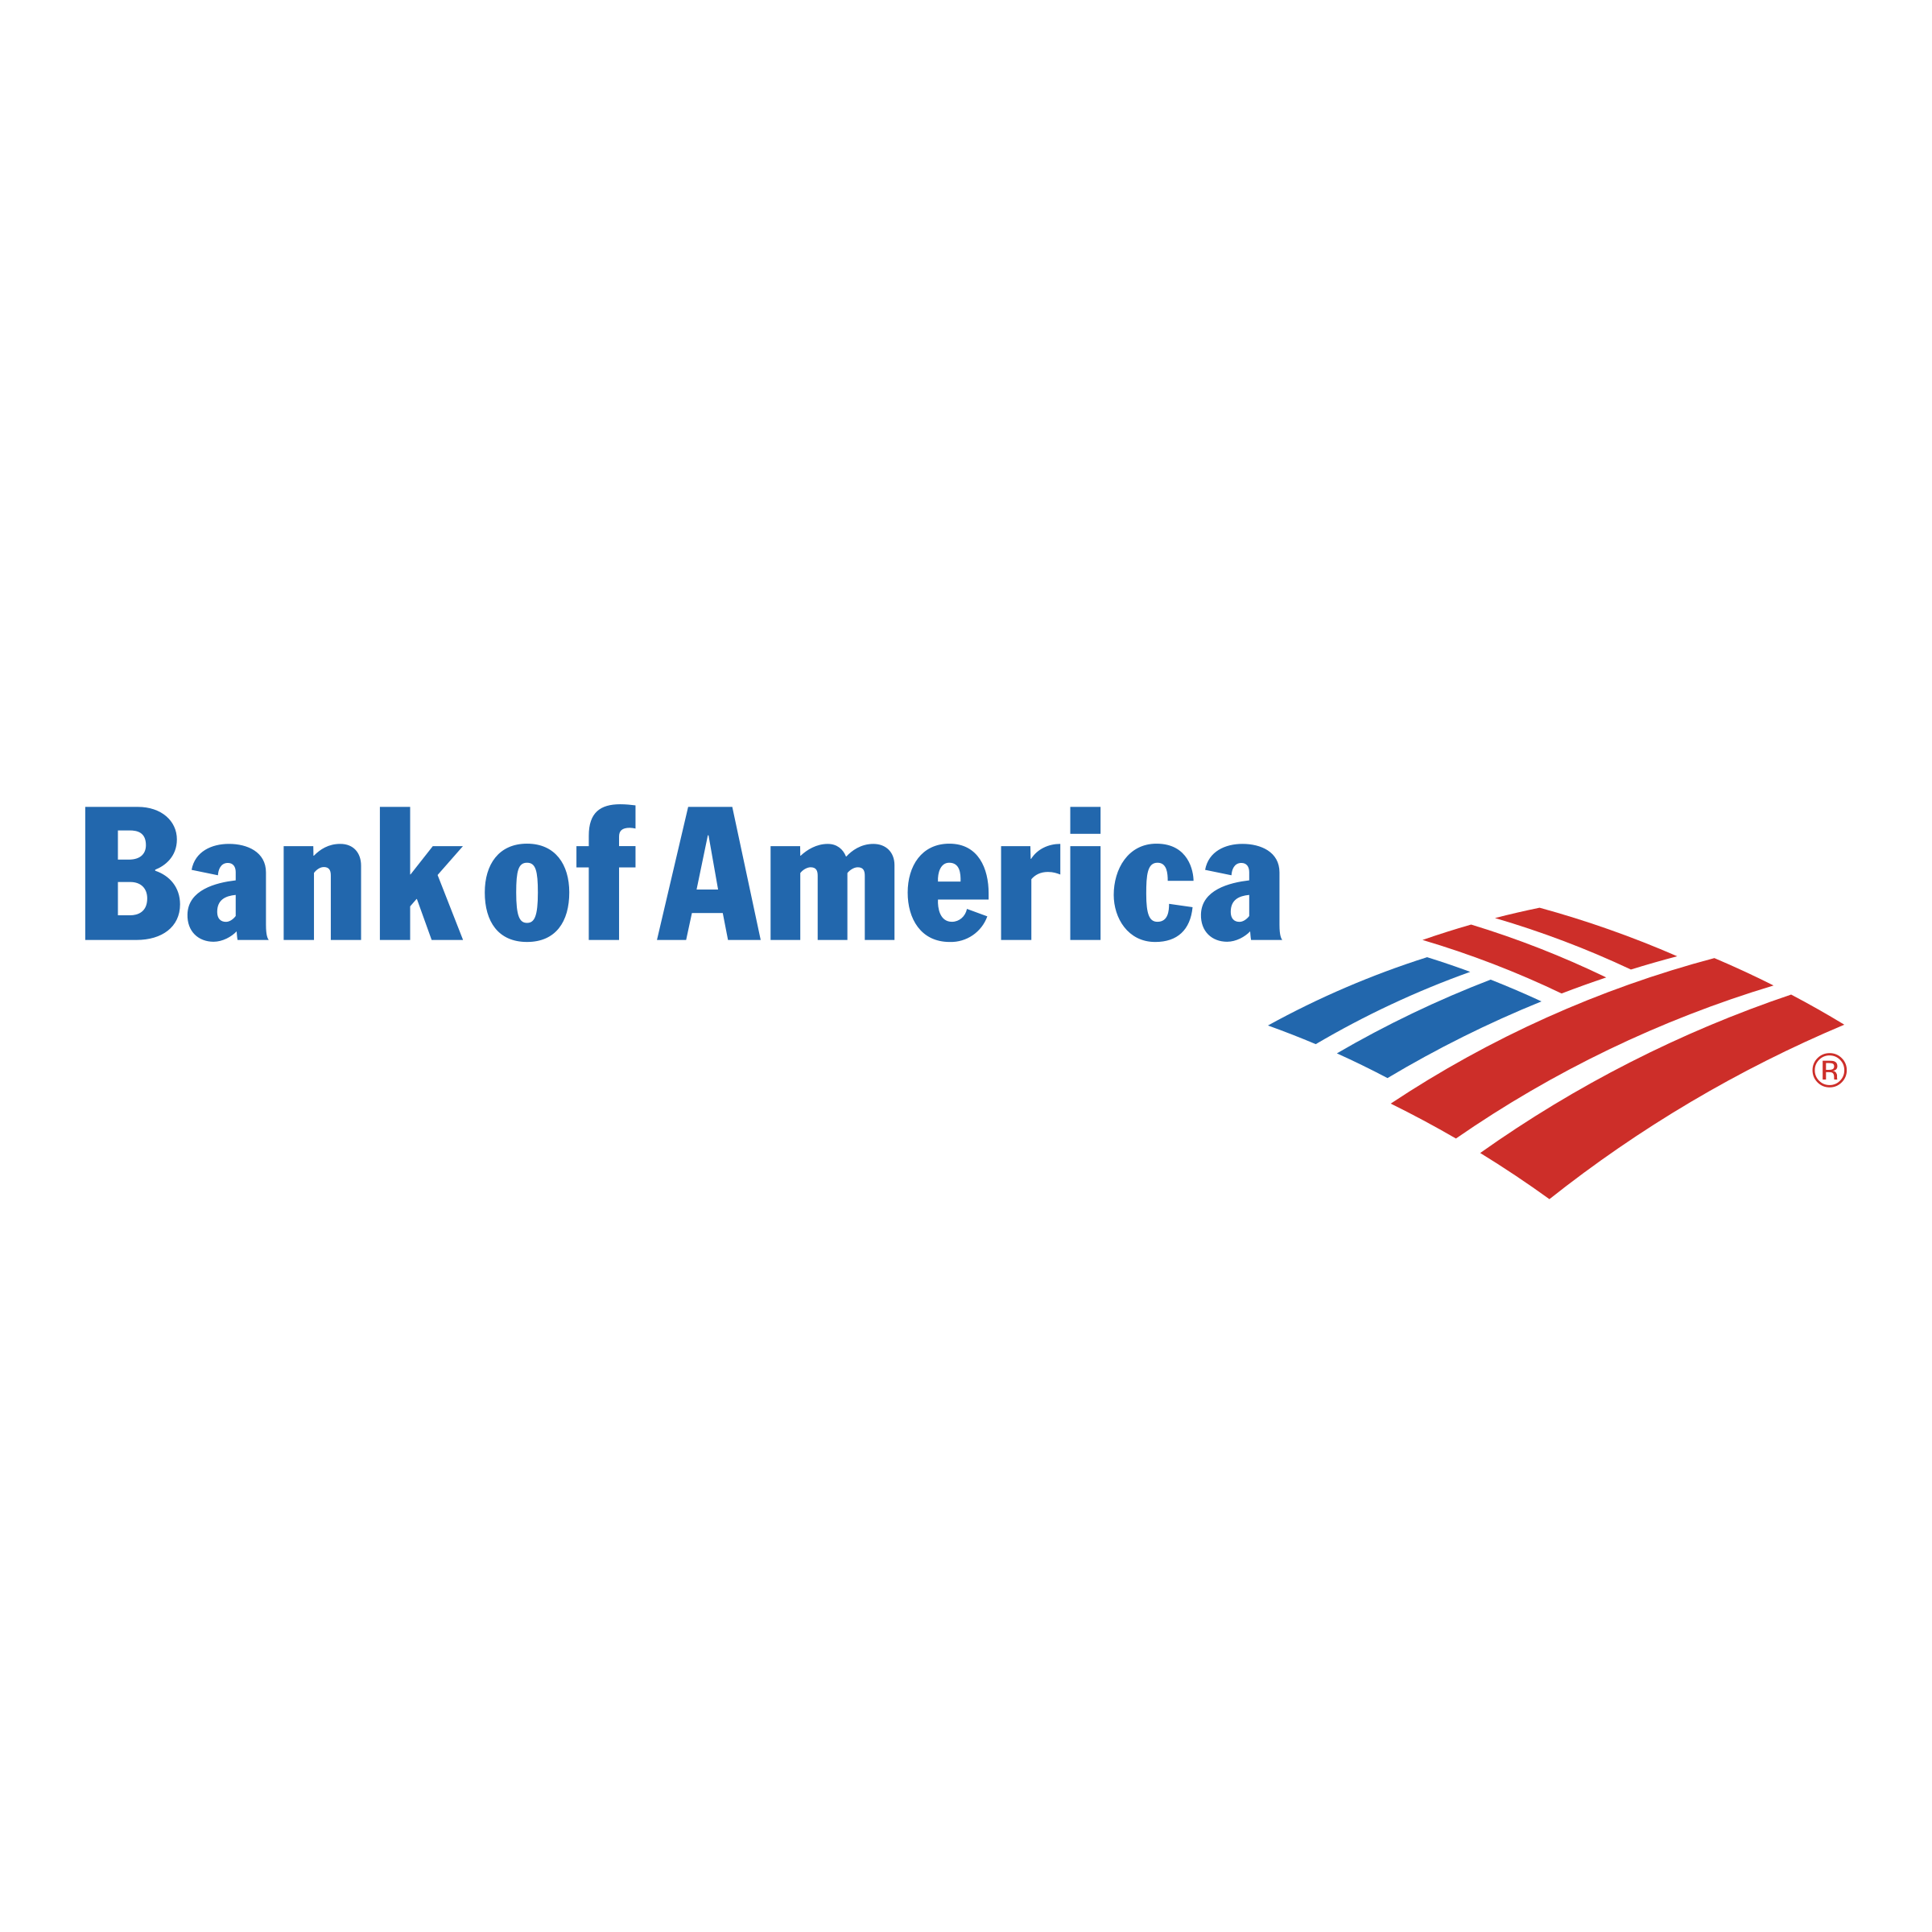 Download Free Png Bank Of Ame